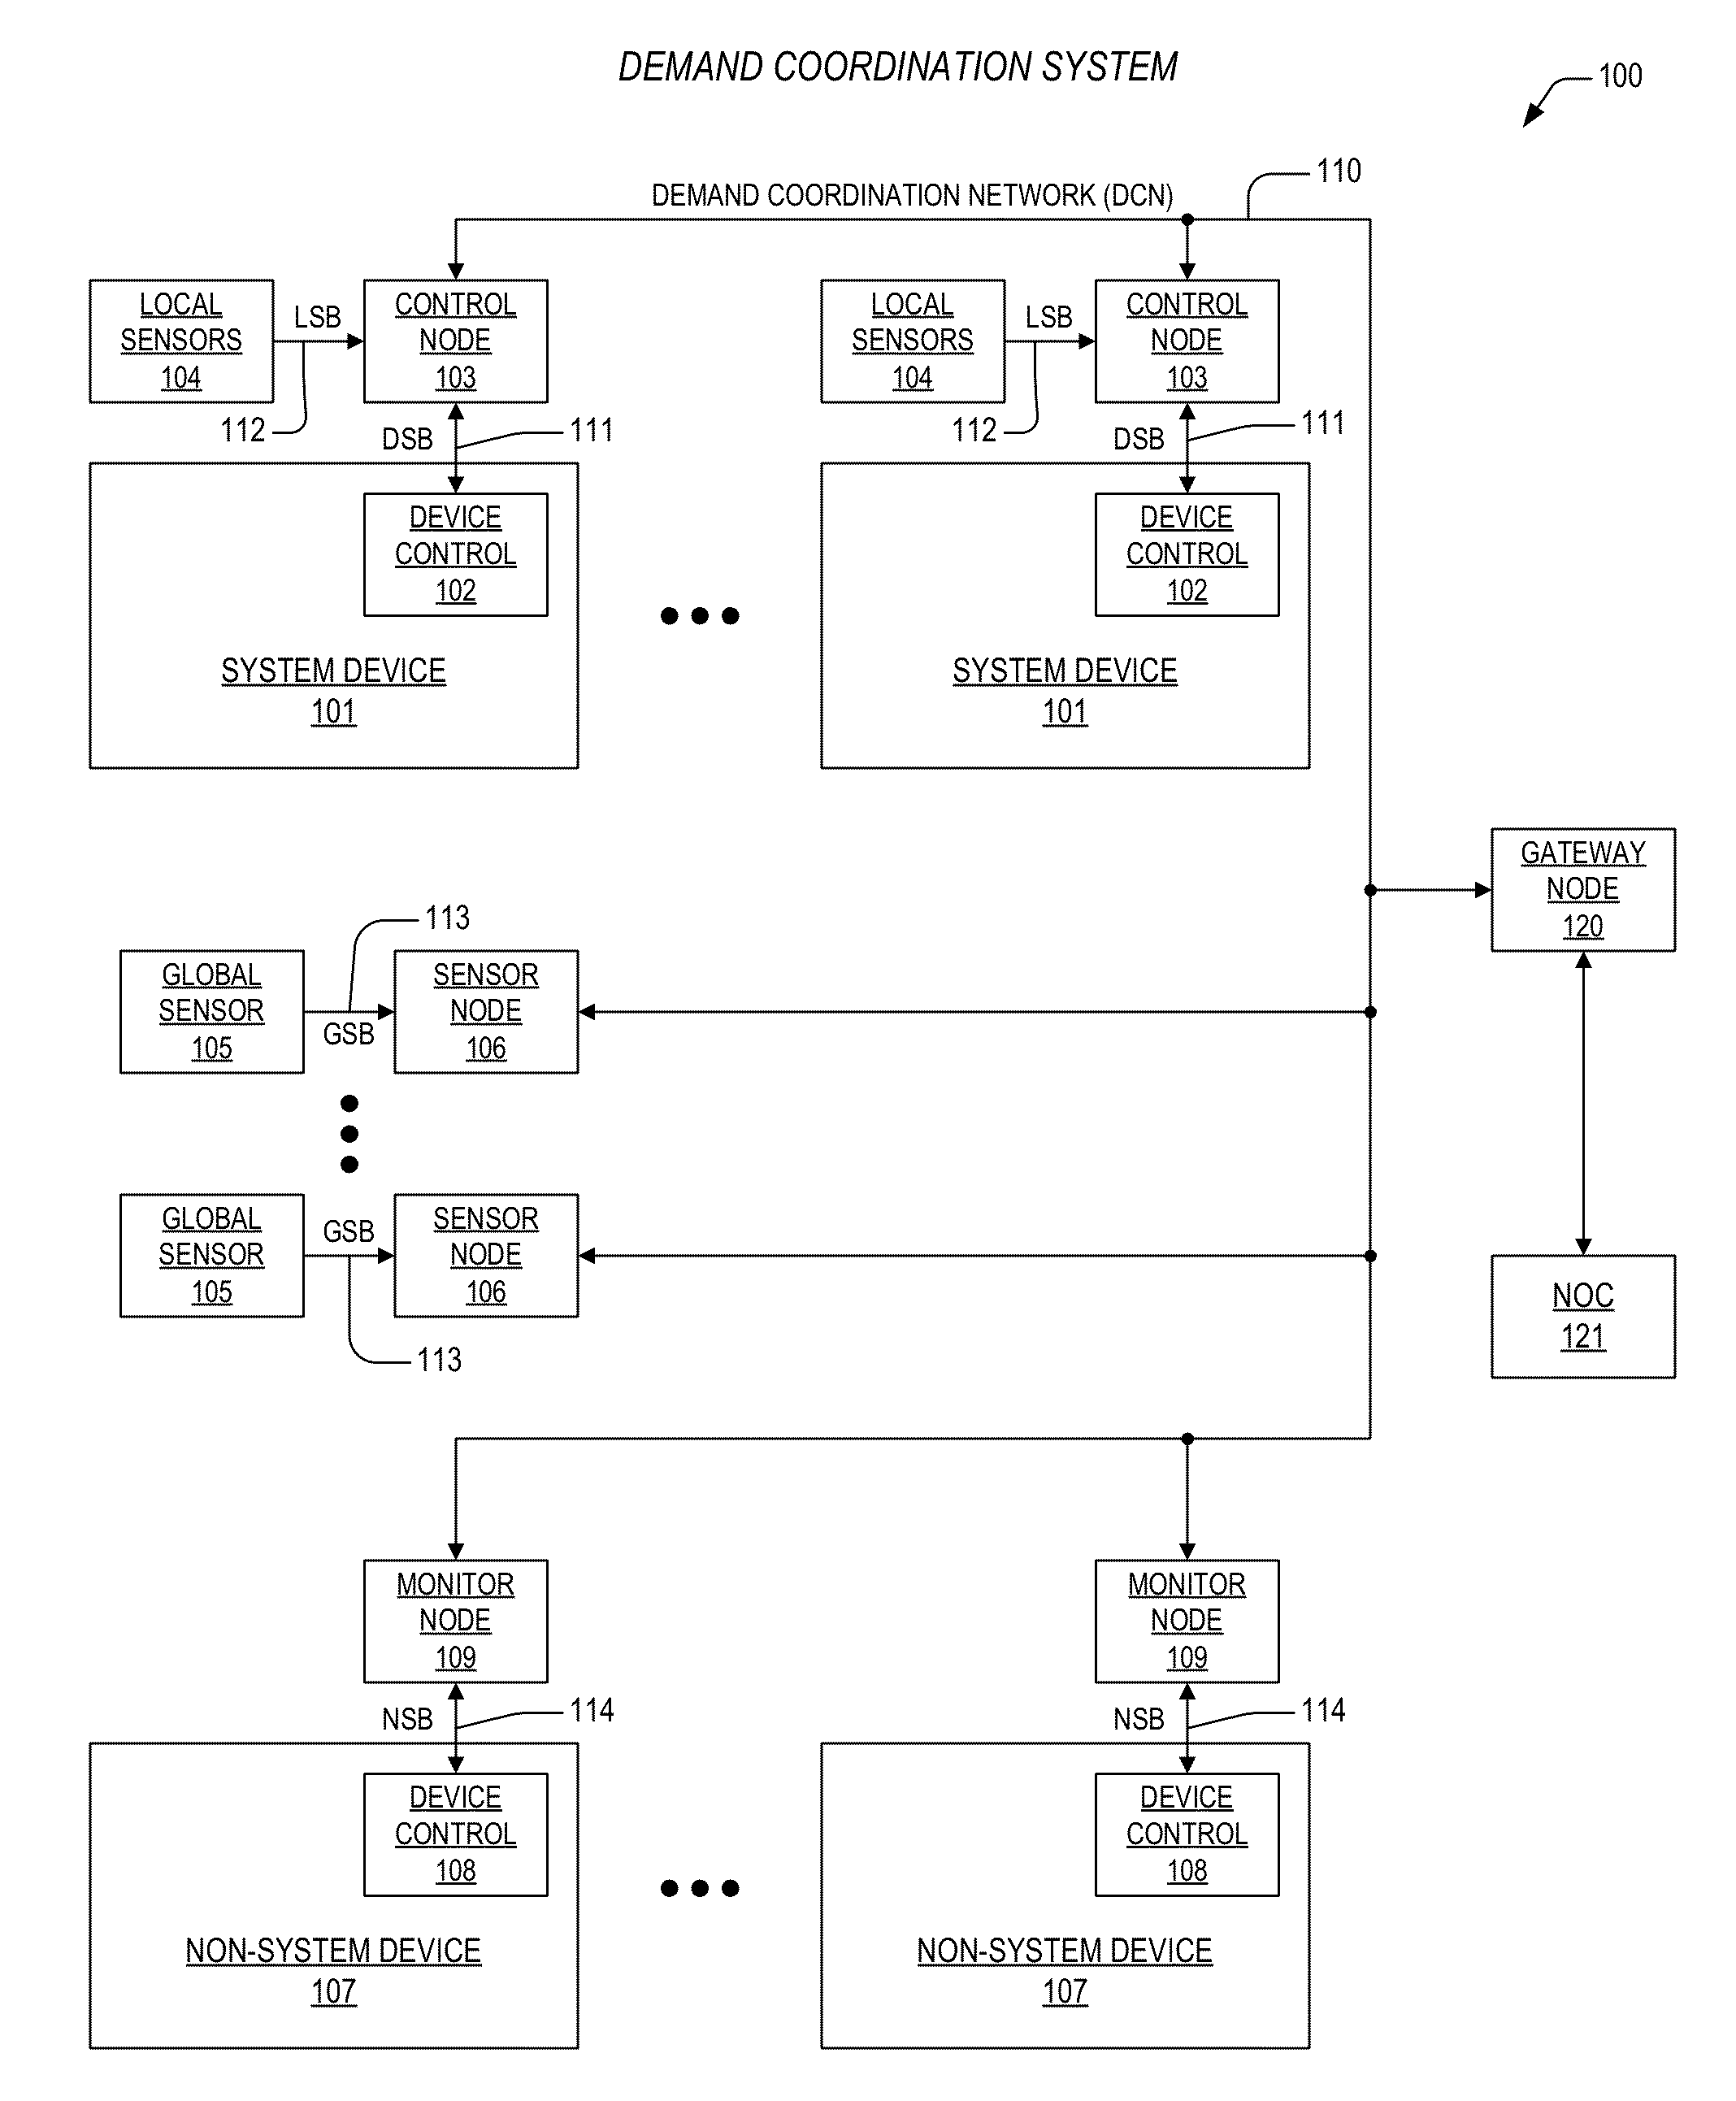 Network latency tolerant control of a demand coordination network